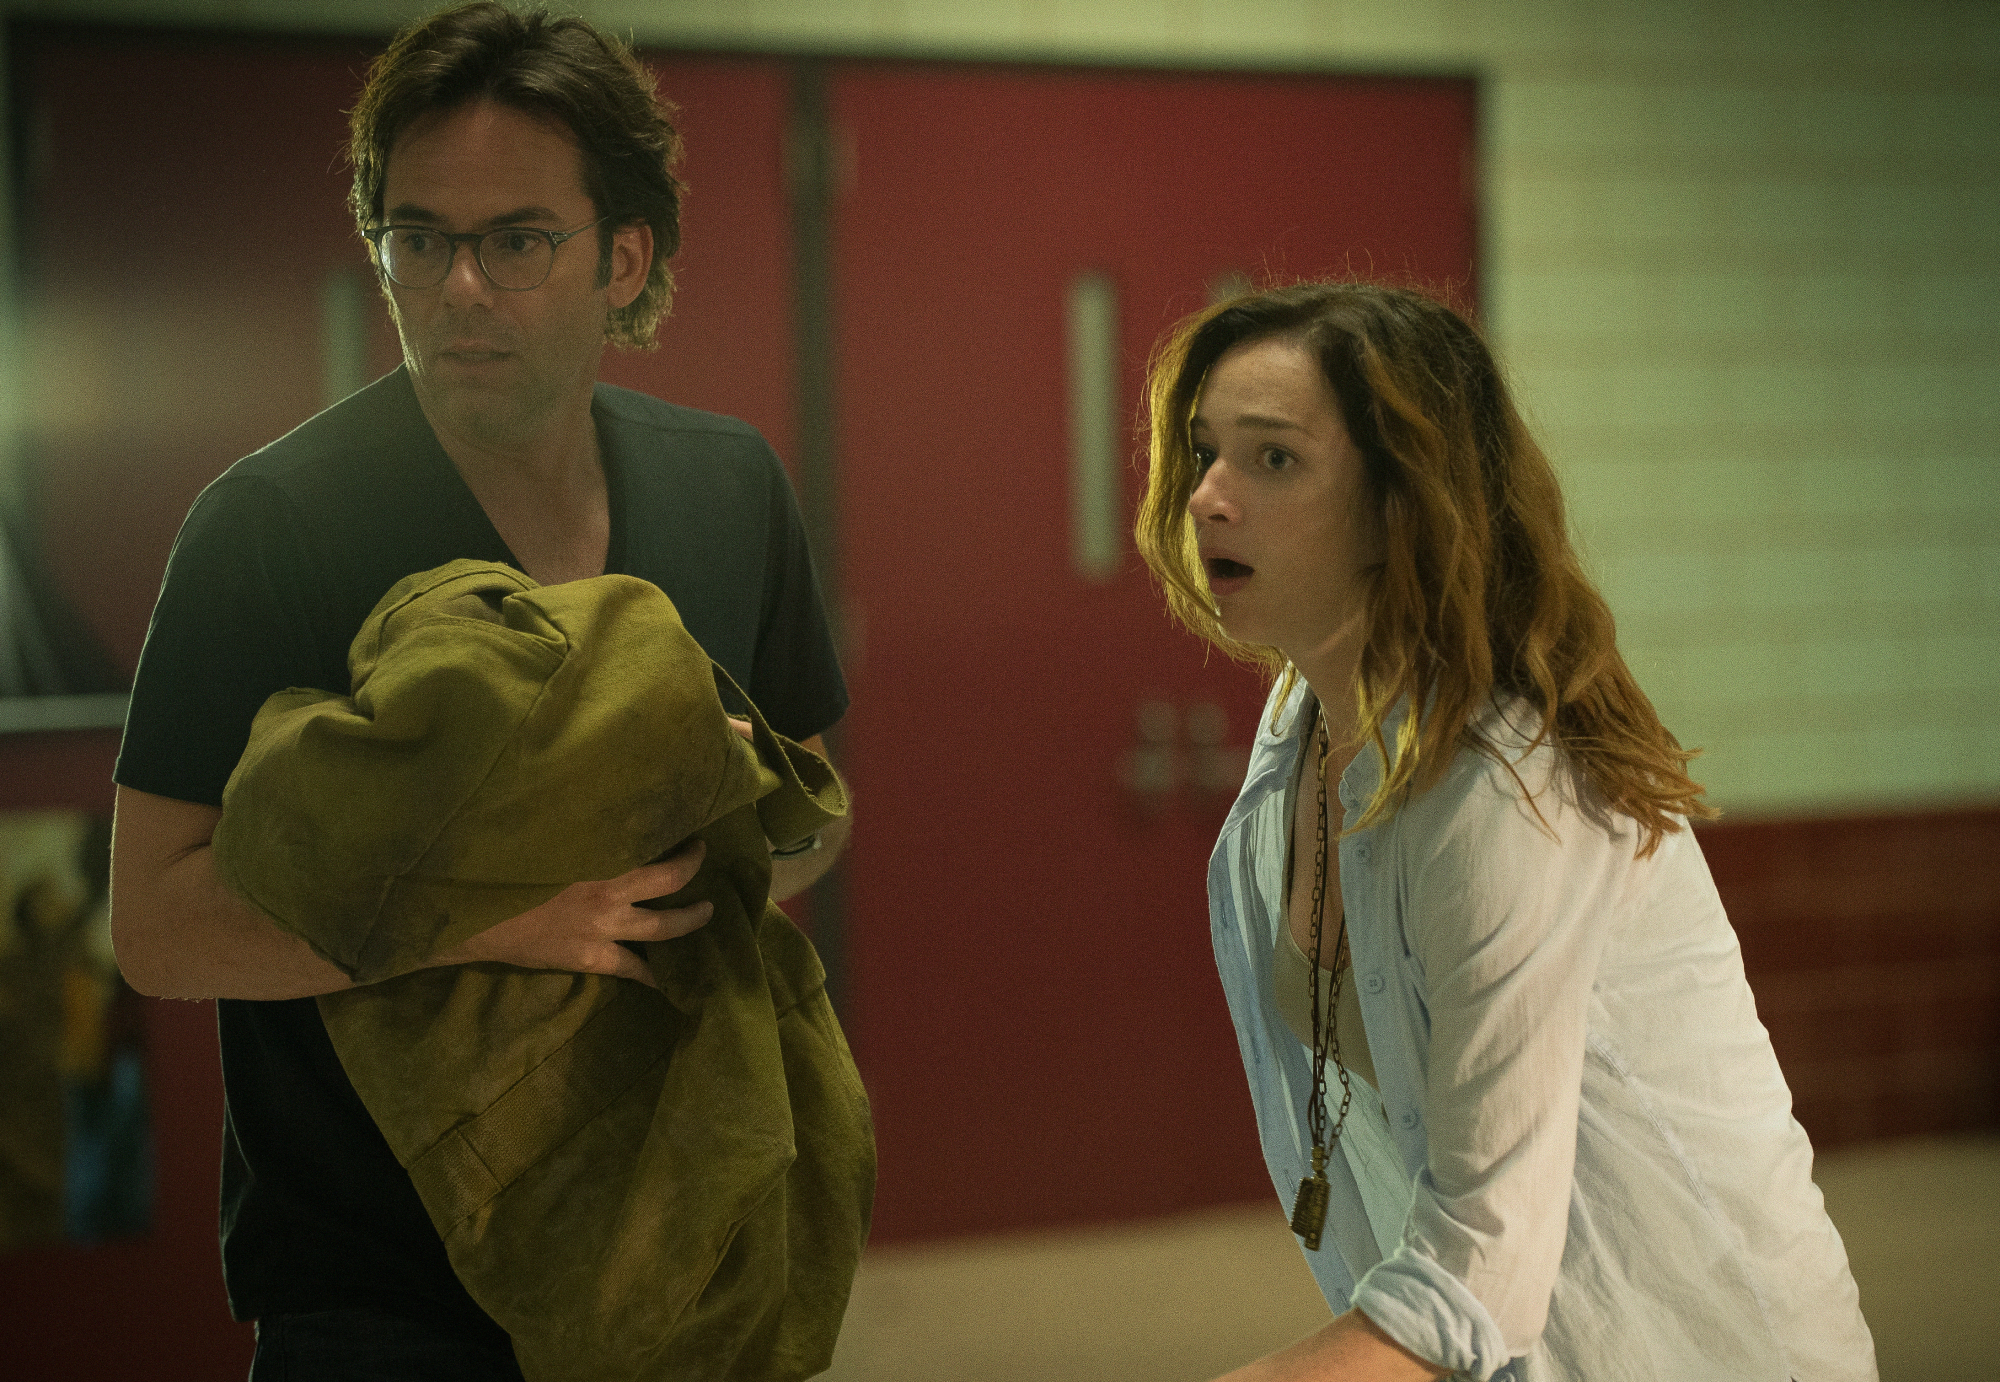 Billy Burke as Mitch Morgan and Kristen Connolly as Jamie Campbell.